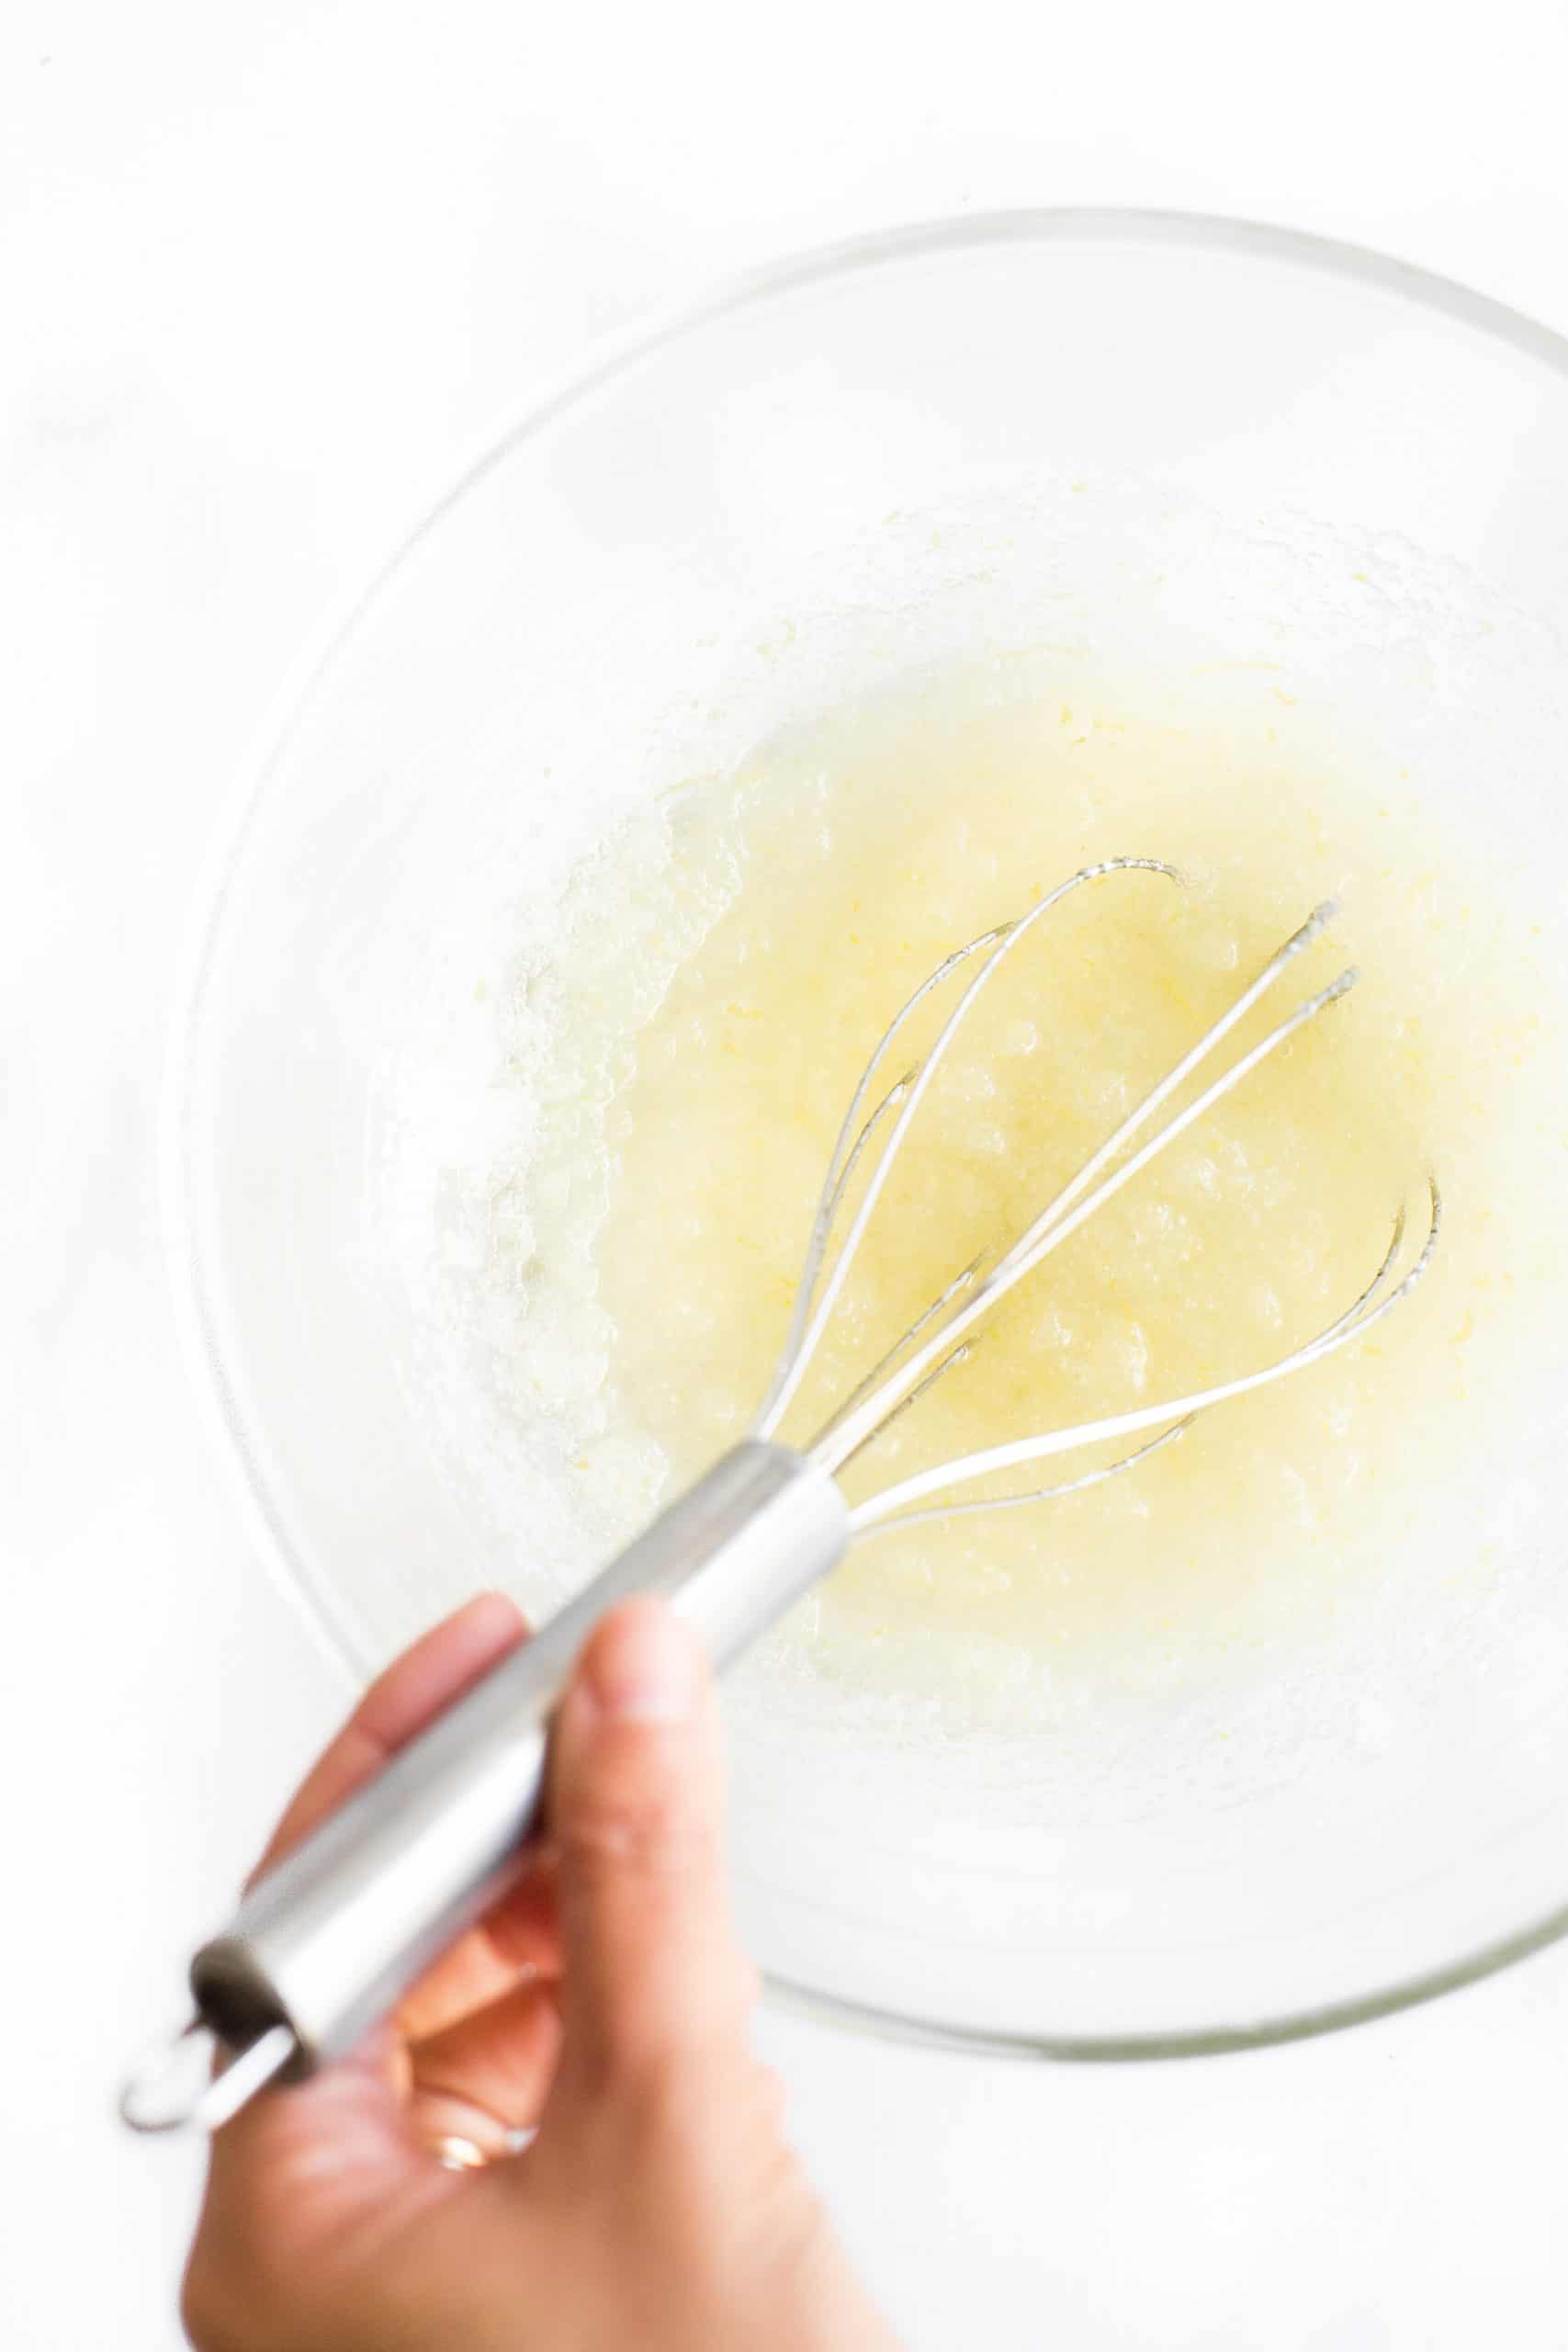 Using a whisk to mix sugar, oil, and zest in a glass bowl.